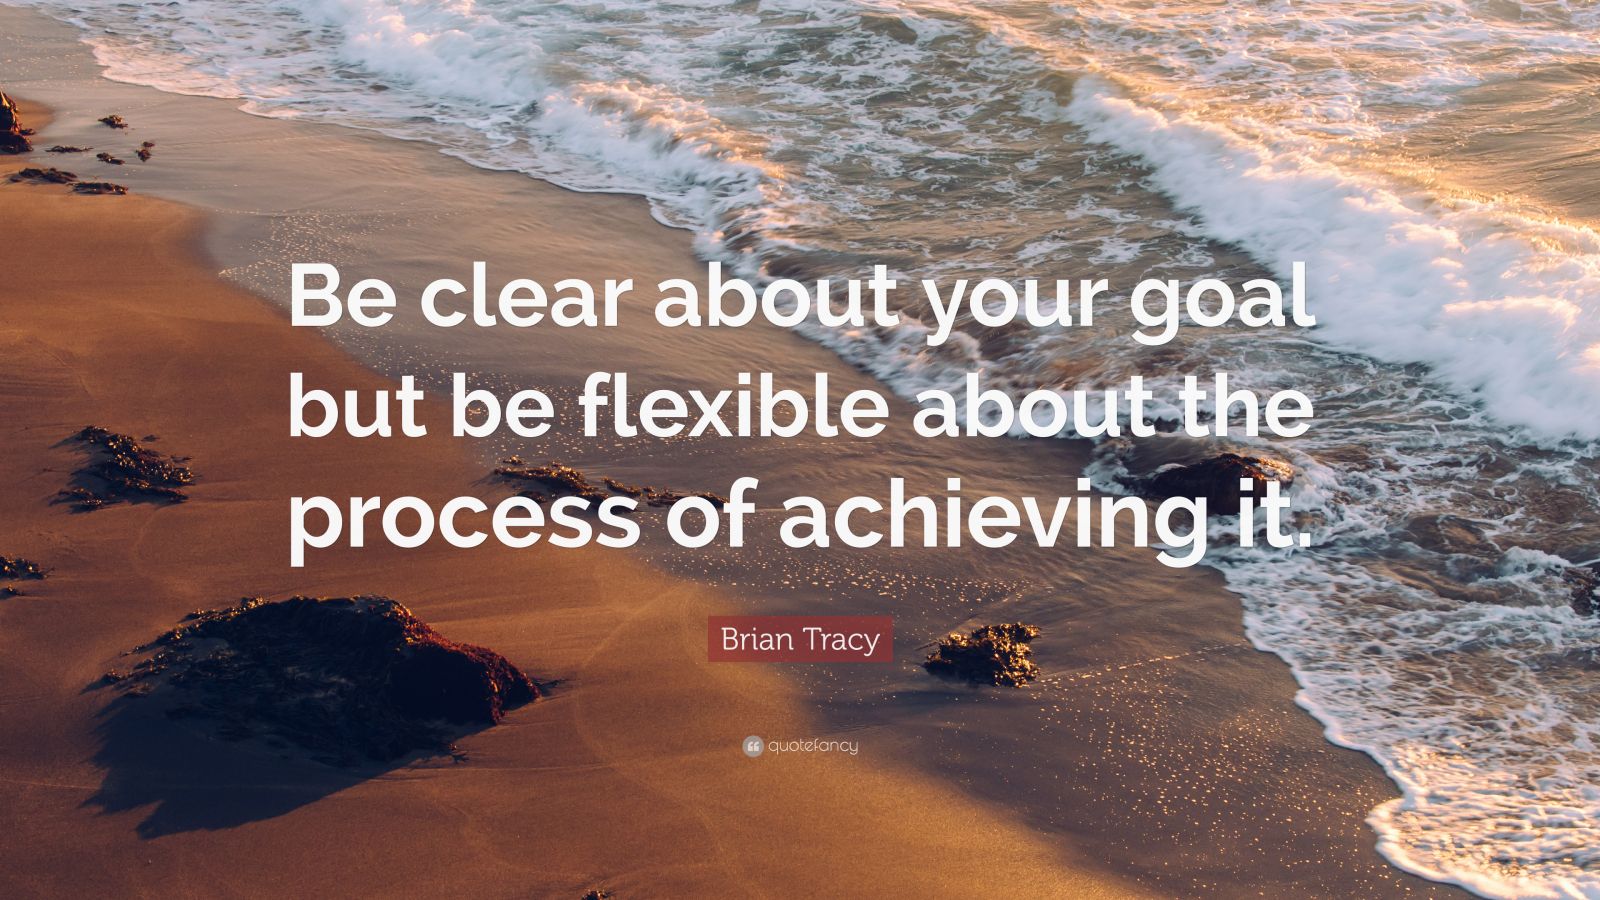 Brian Tracy Quote: “Be clear about your goal but be flexible about the